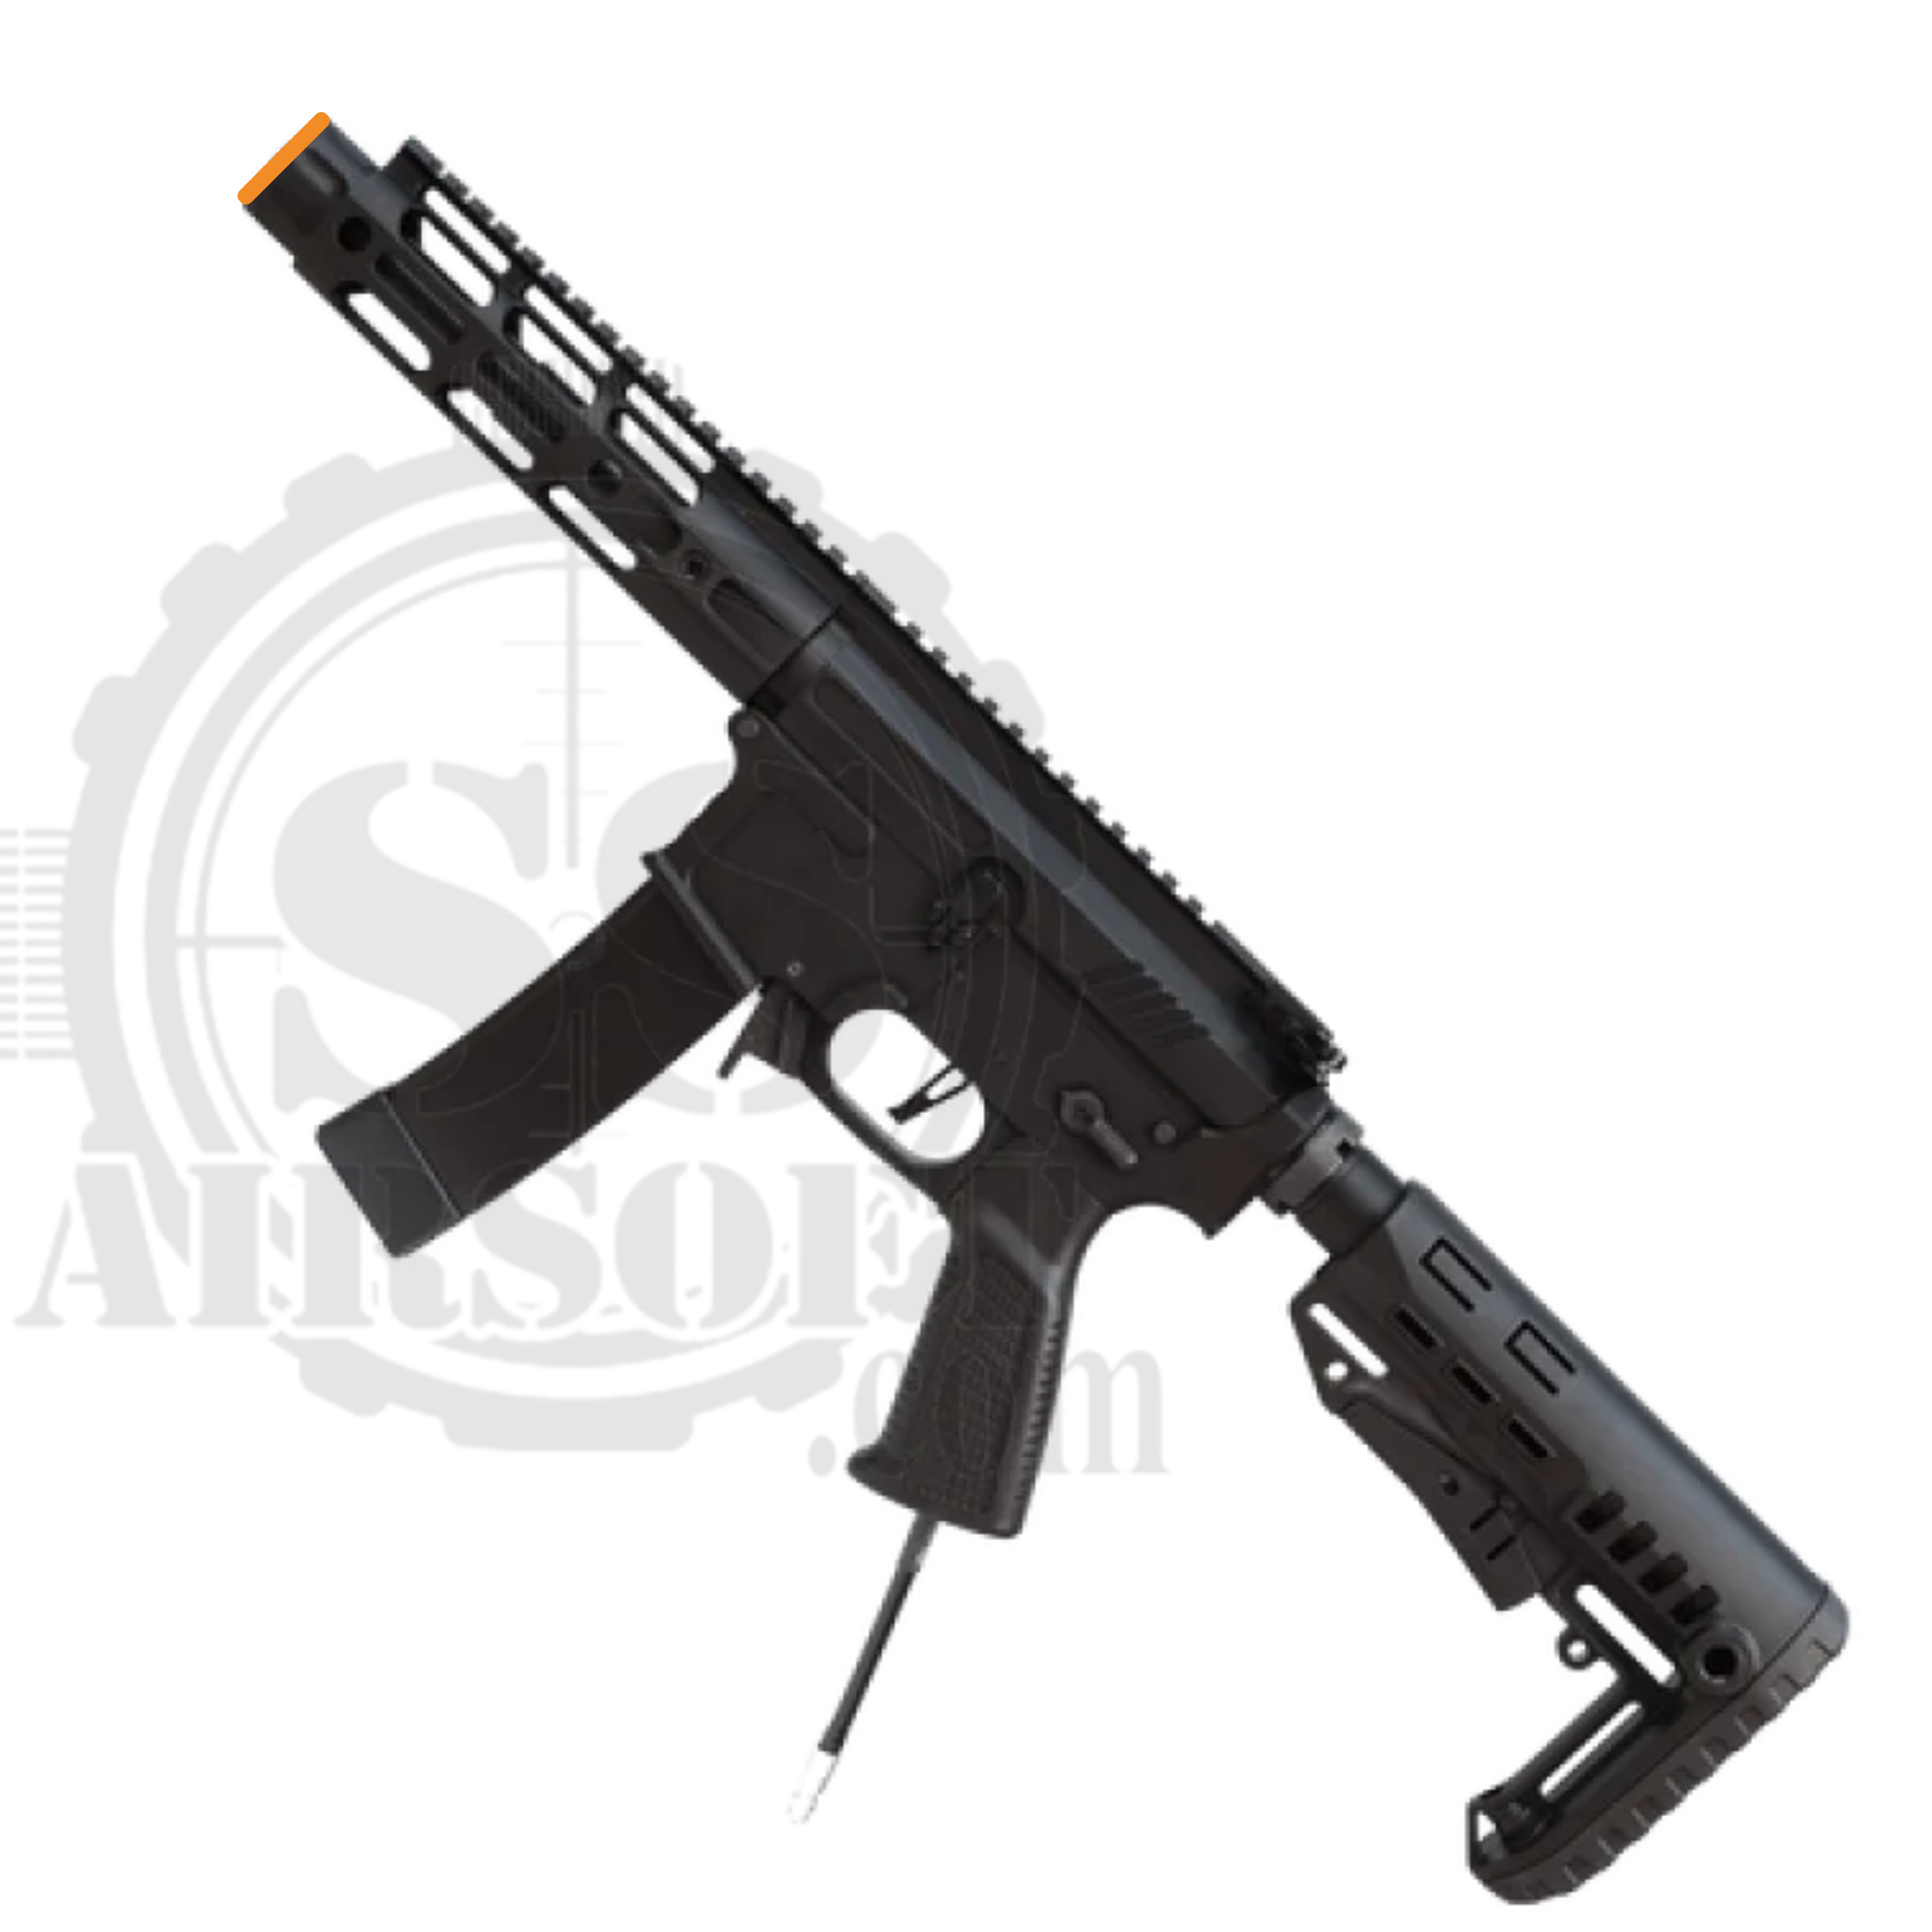 MTW PKG 9MM w/ INFERNO Engine and Tactical Stock, 7" Barrel, 7" Rail - ssairsoft.com